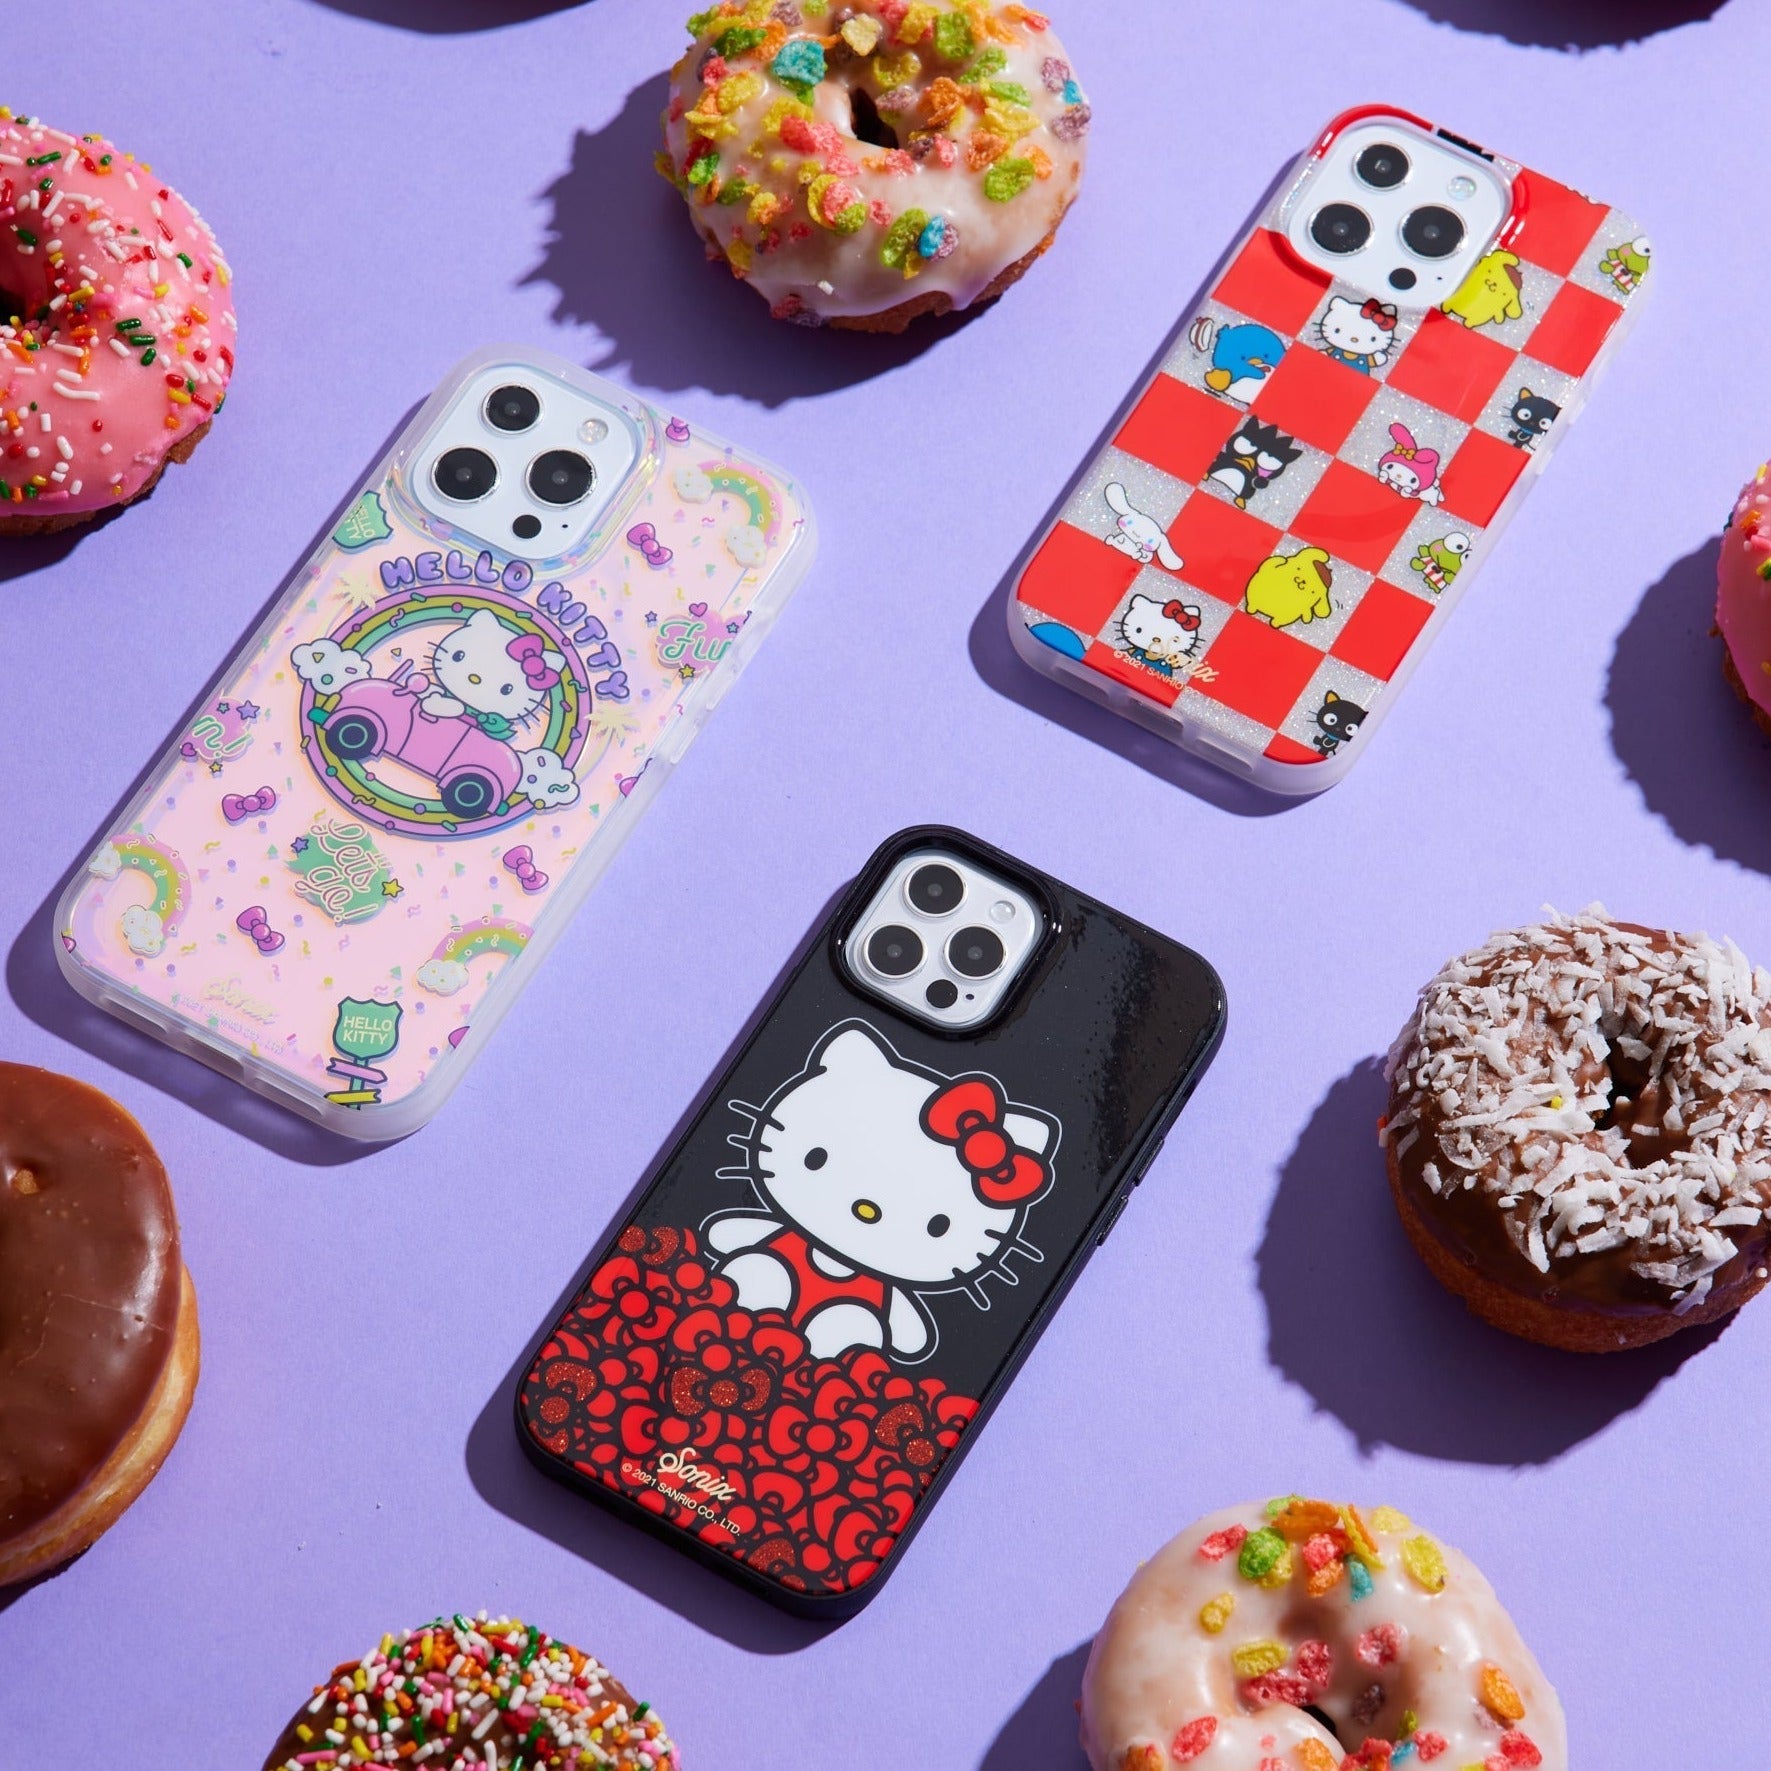 three hello kitty themed phone cases shown on a purple background